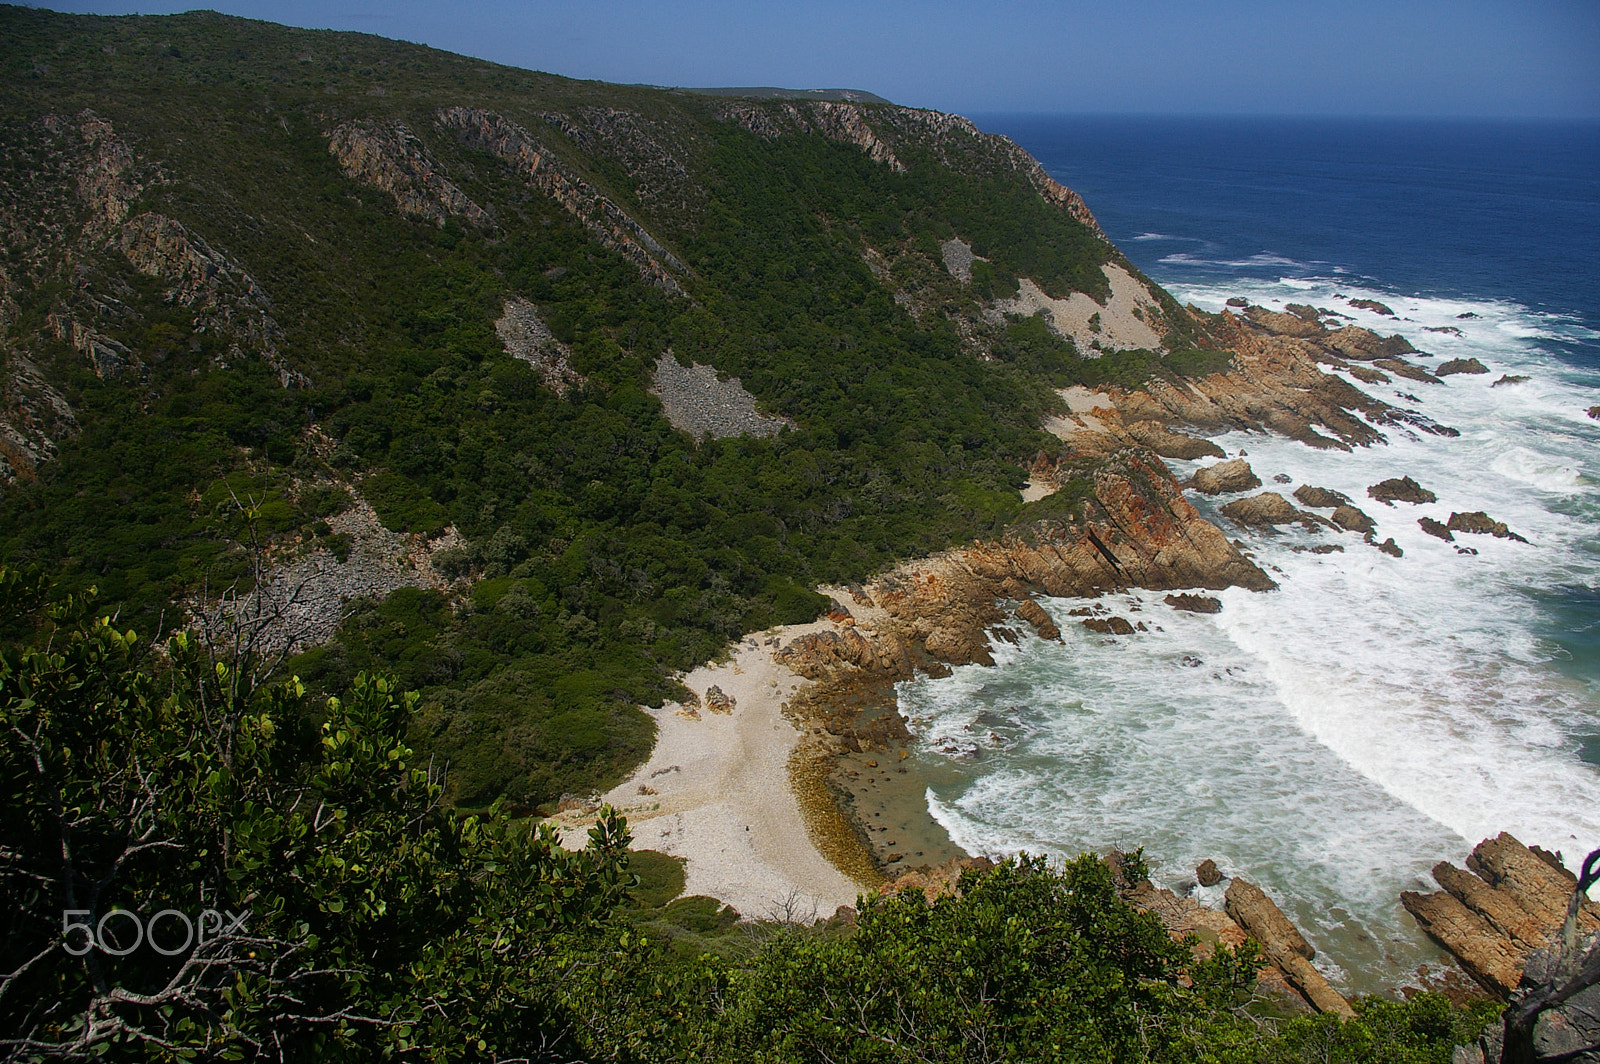 Pentax *ist DL2 sample photo. Gorgeous garden route photography